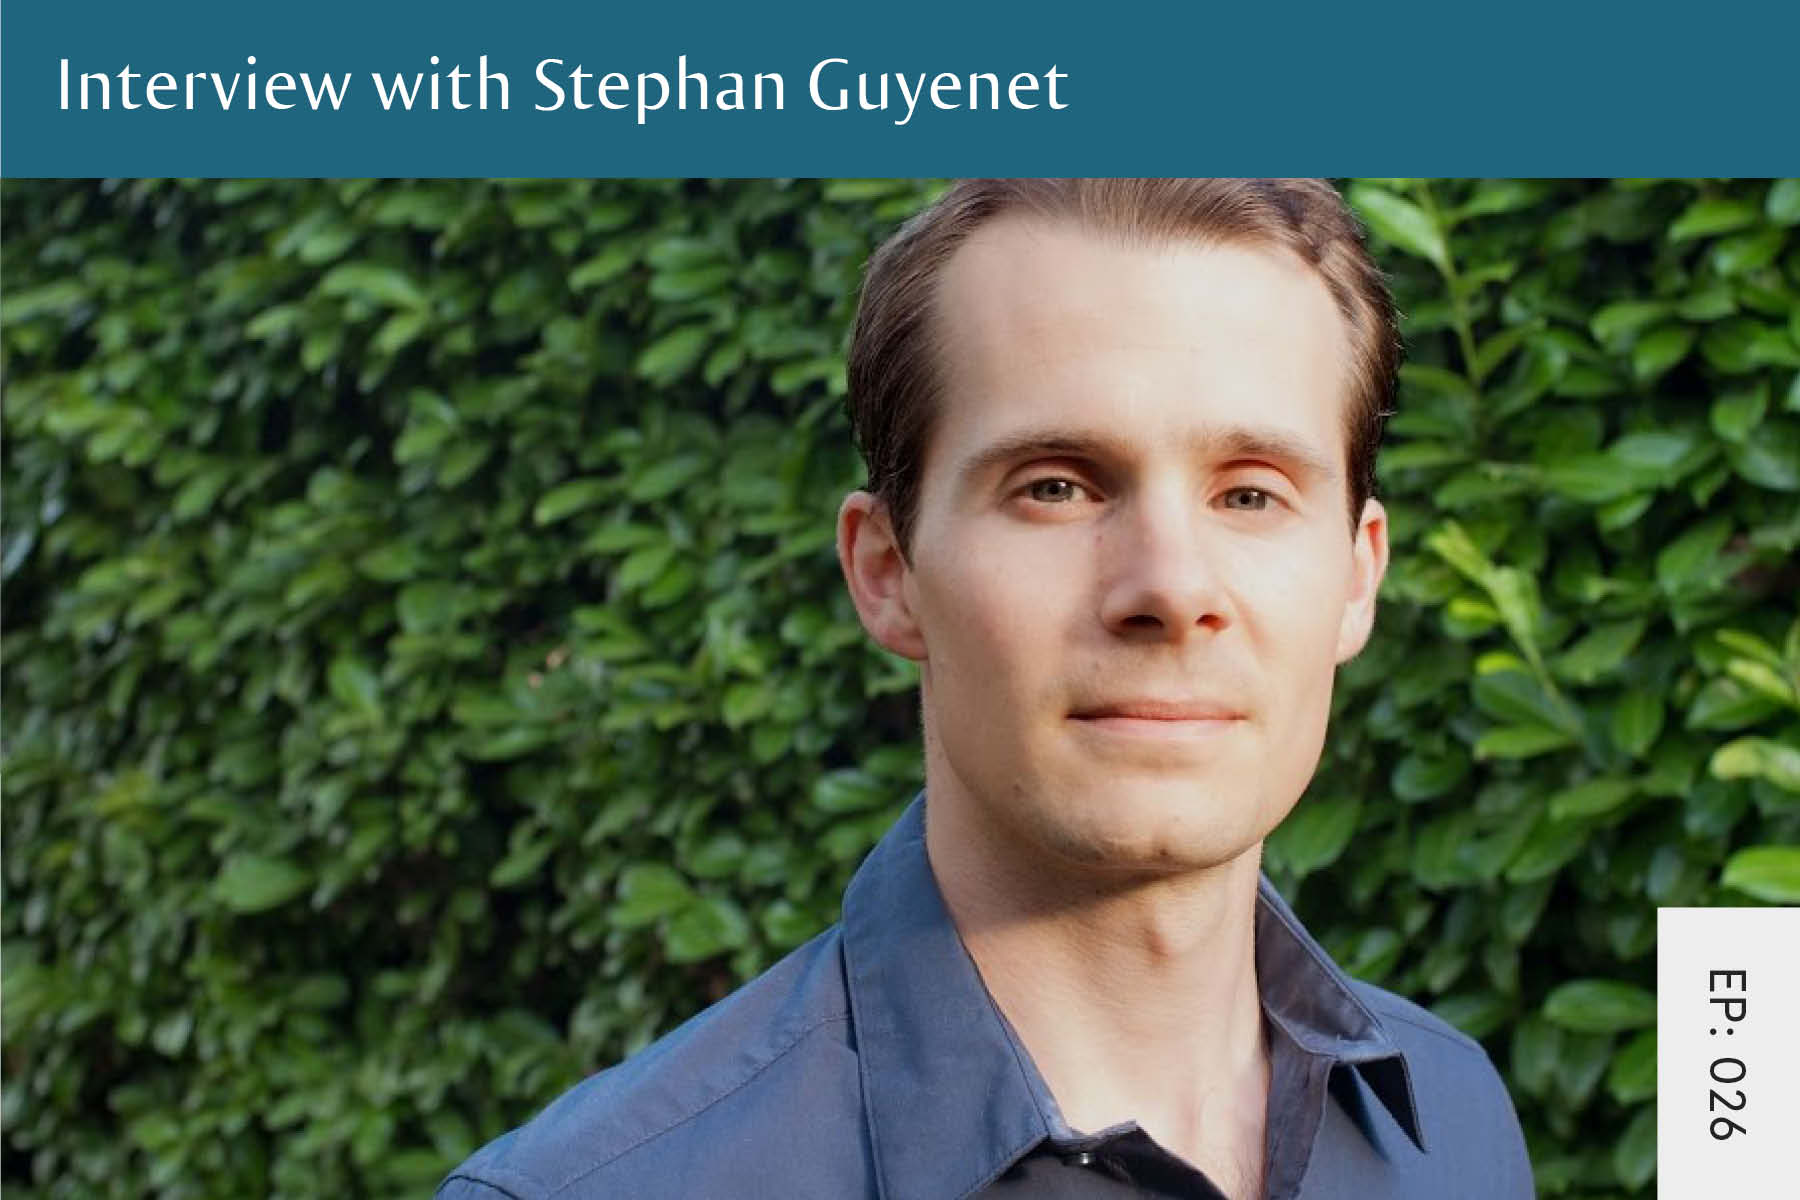 026: Interview with Stephan Guyenet - Seven Health: Eating Disorder Recovery and Anti Diet Nutritionist